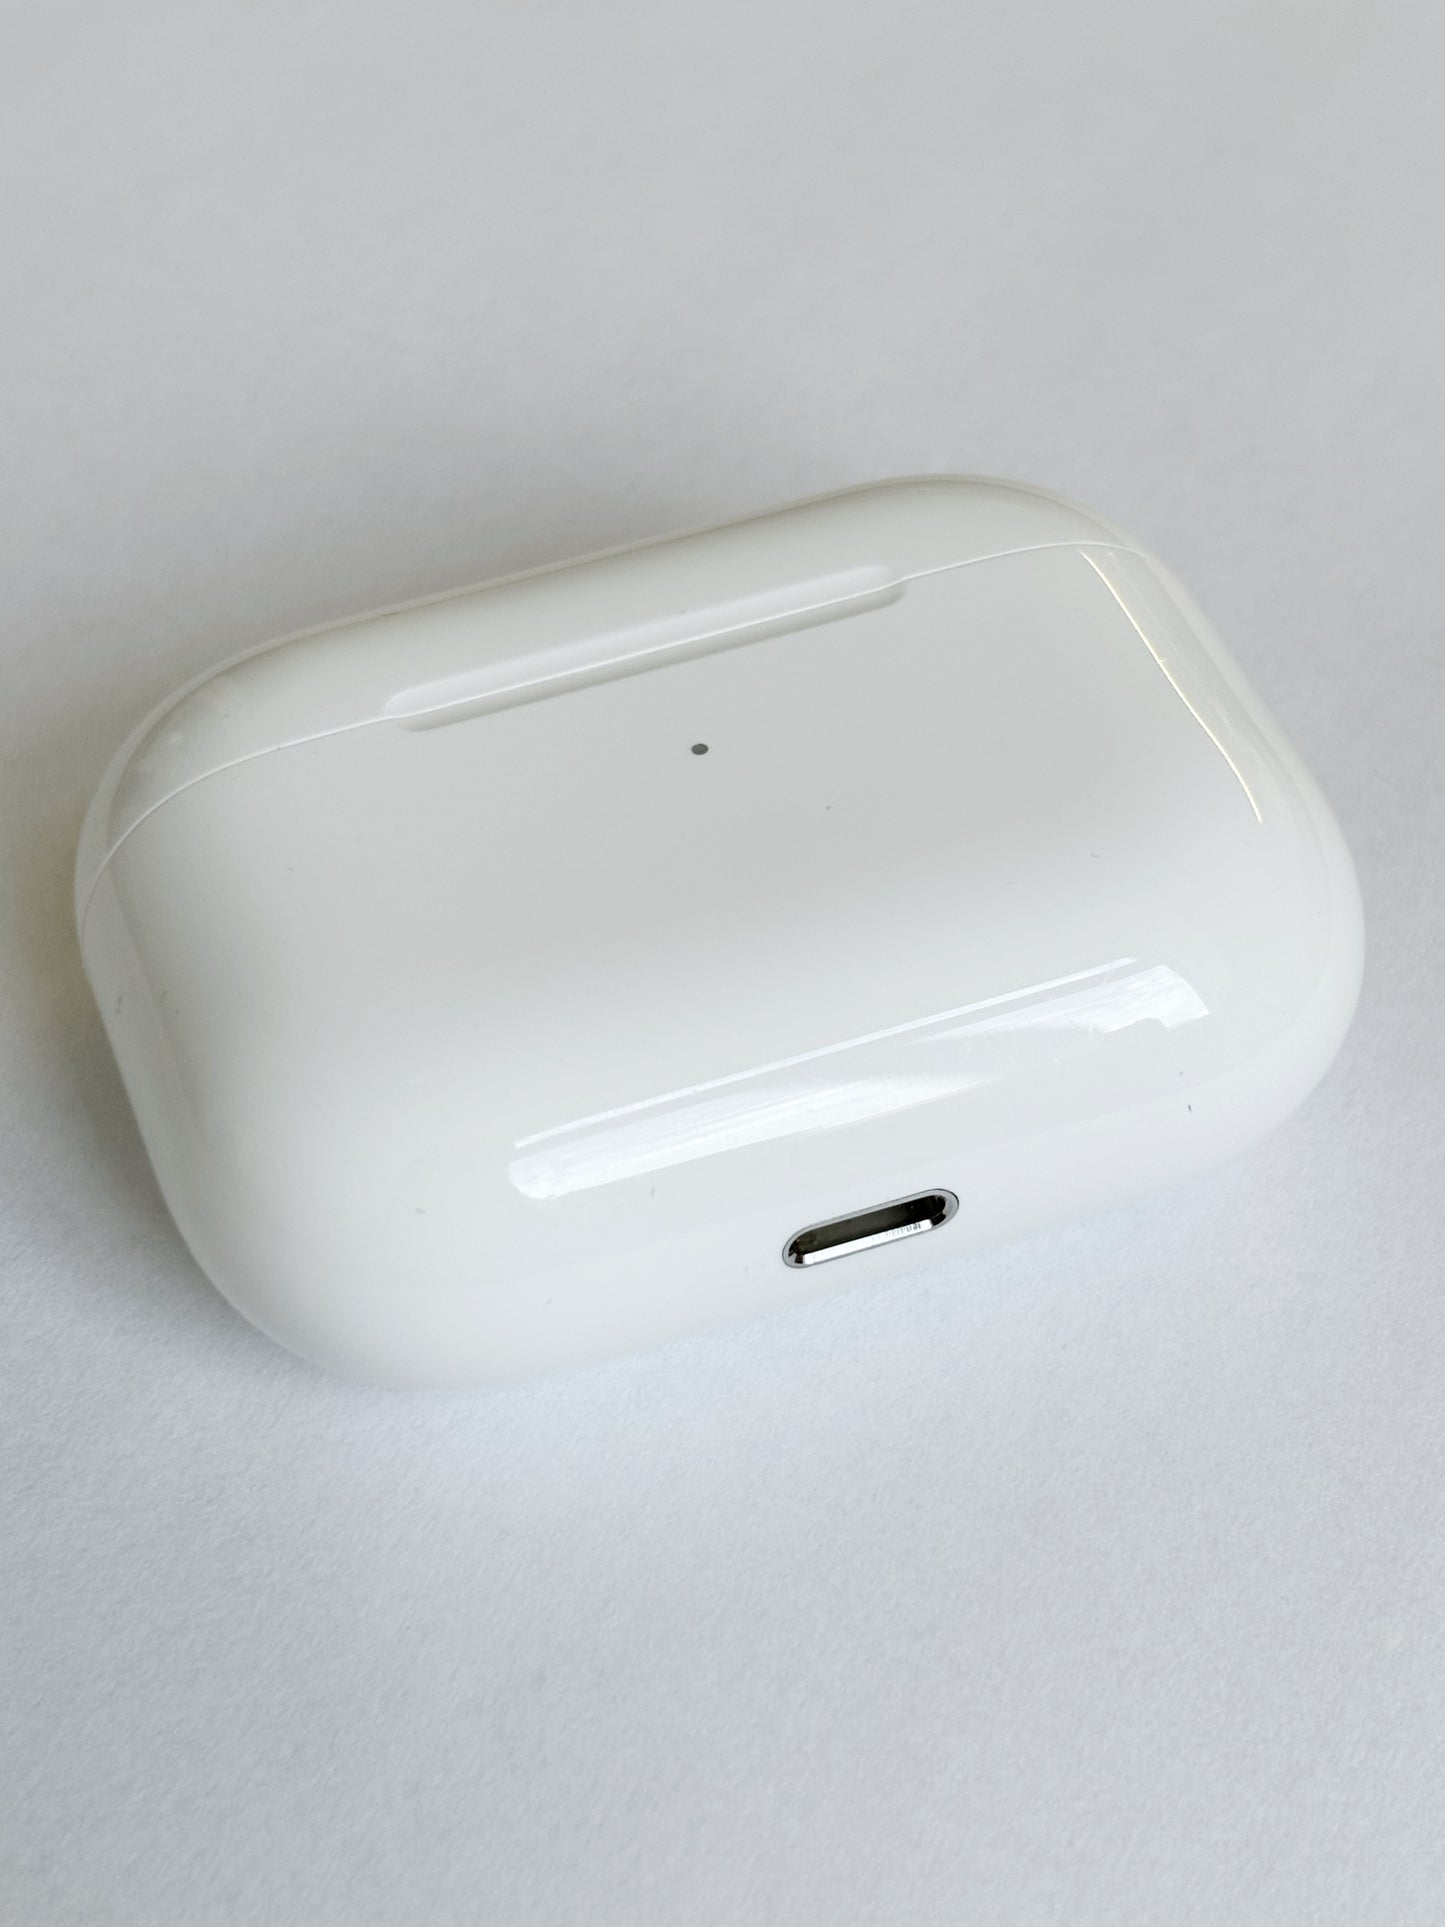 Apple AirPods Pro 1. Generation Ladecase (A2190) Refurbished